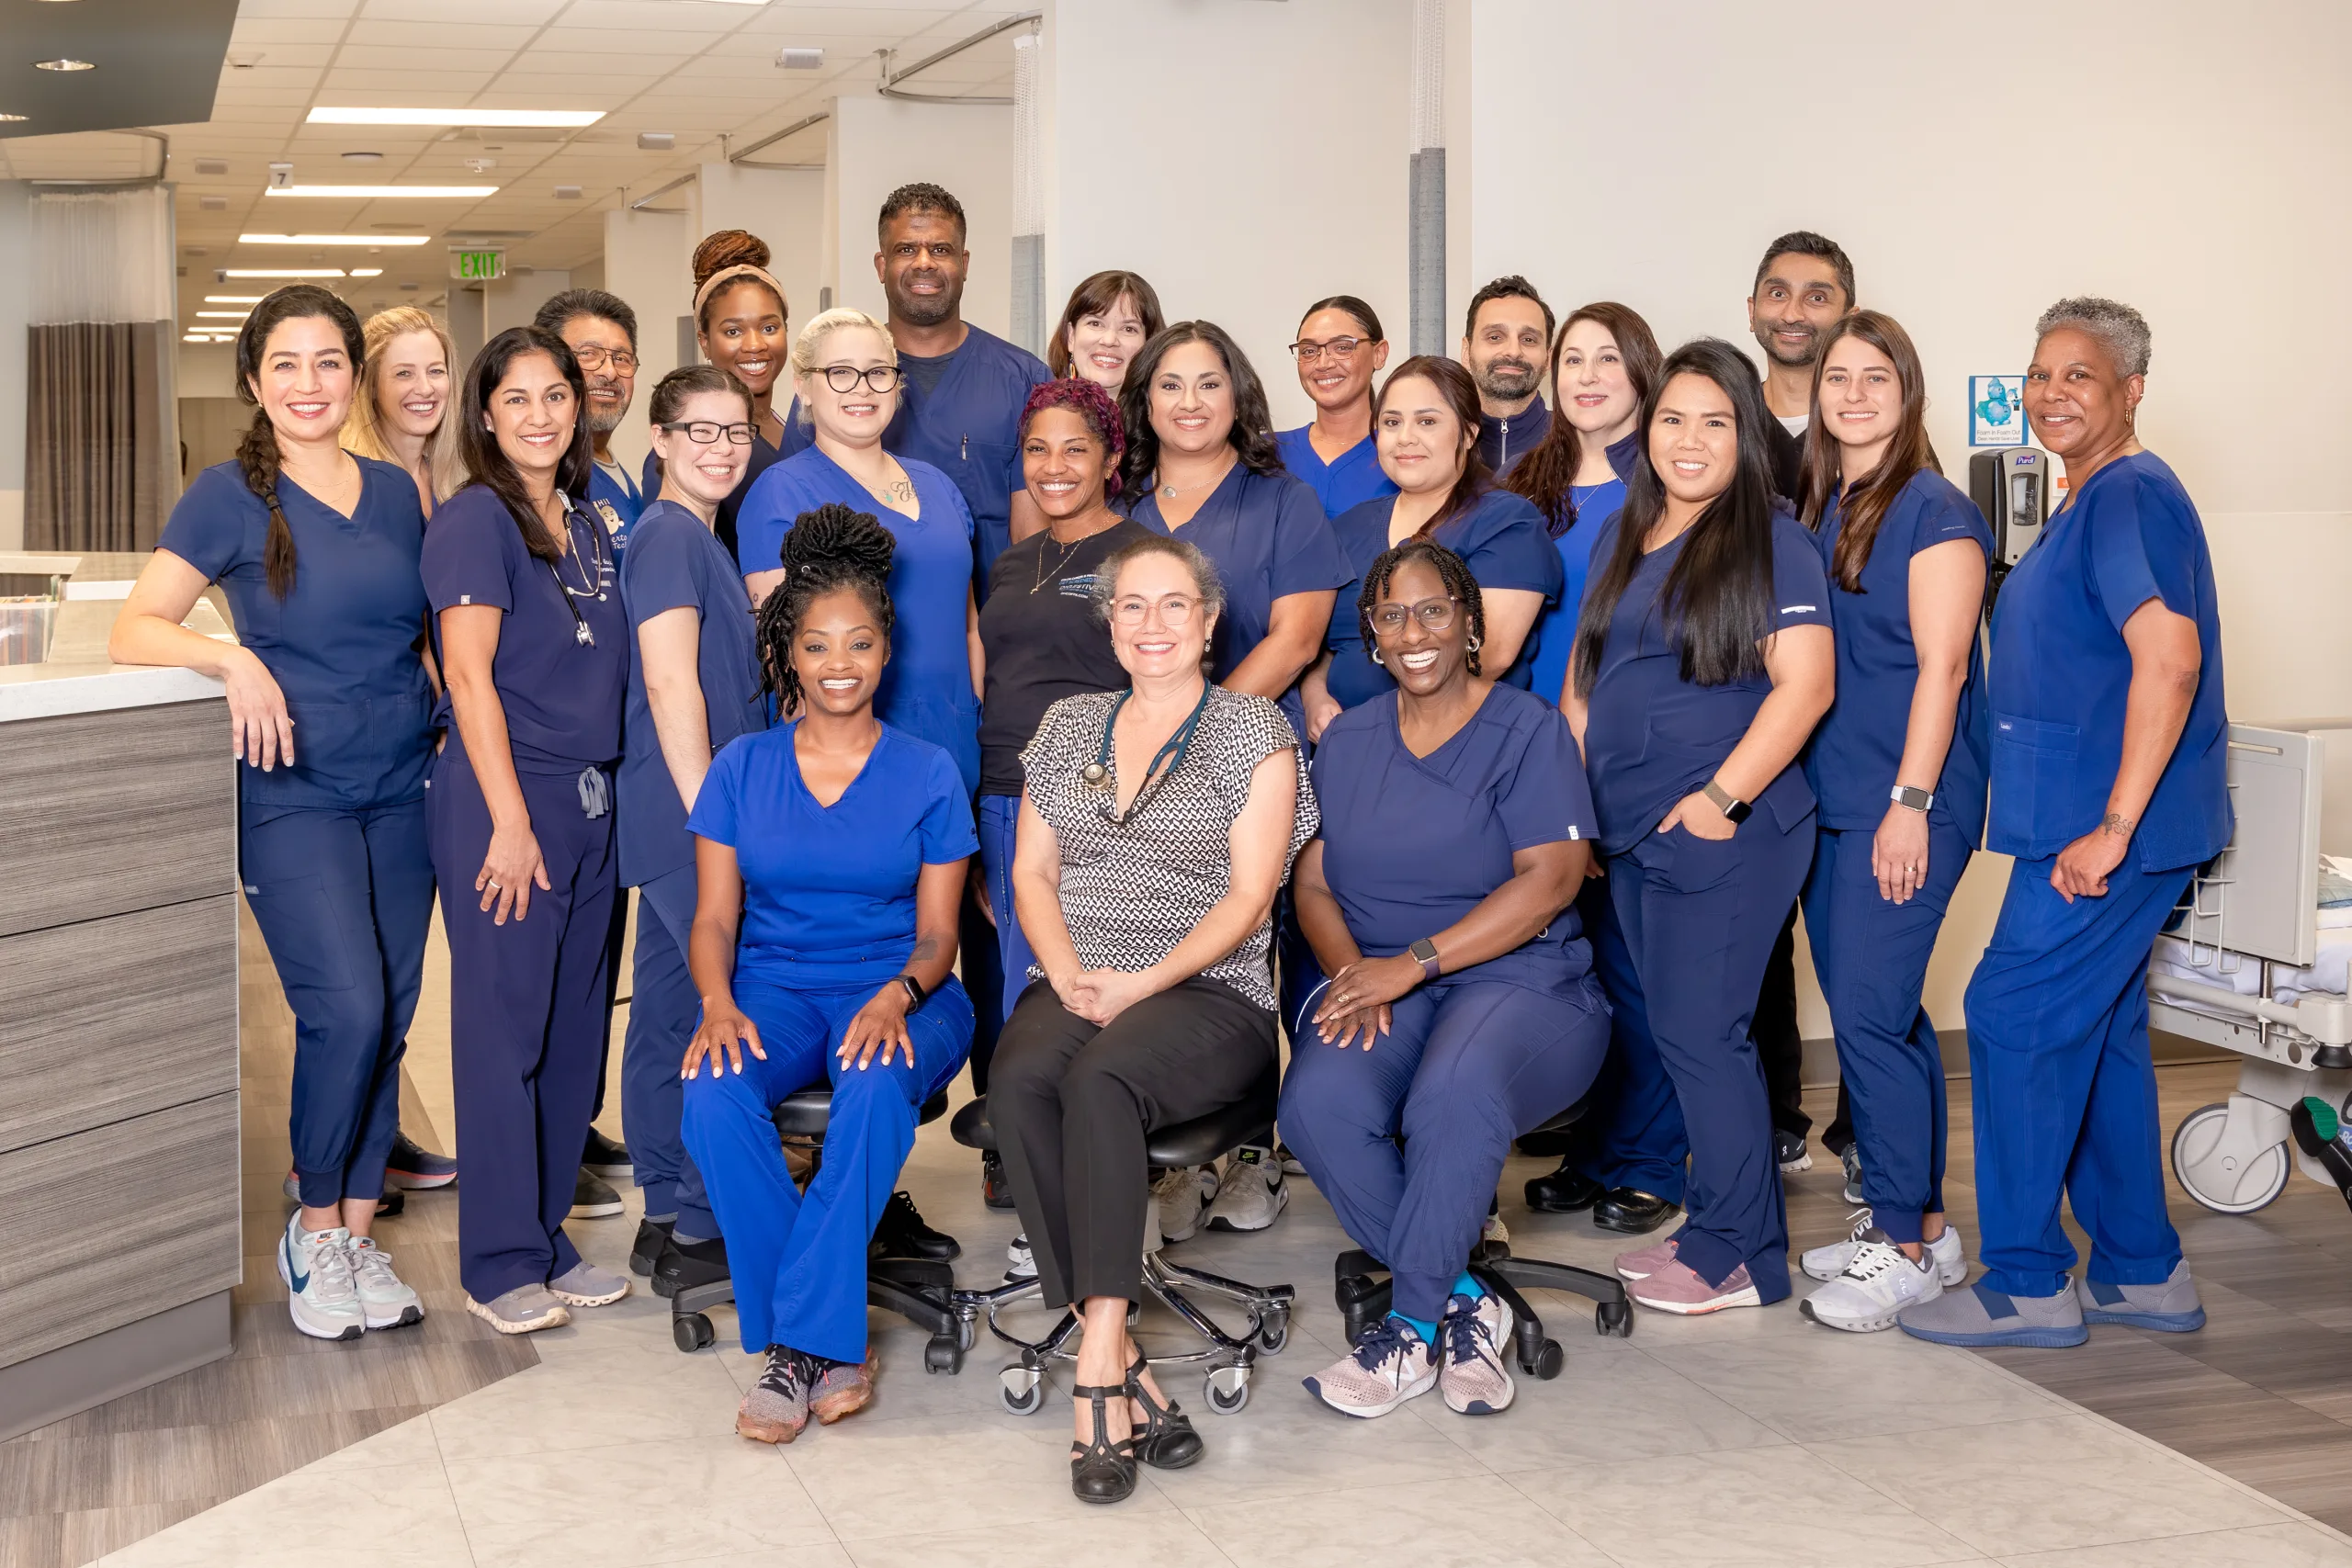 Digestive Health Center of Dallas staff poses for group photo wearing blue scrubs